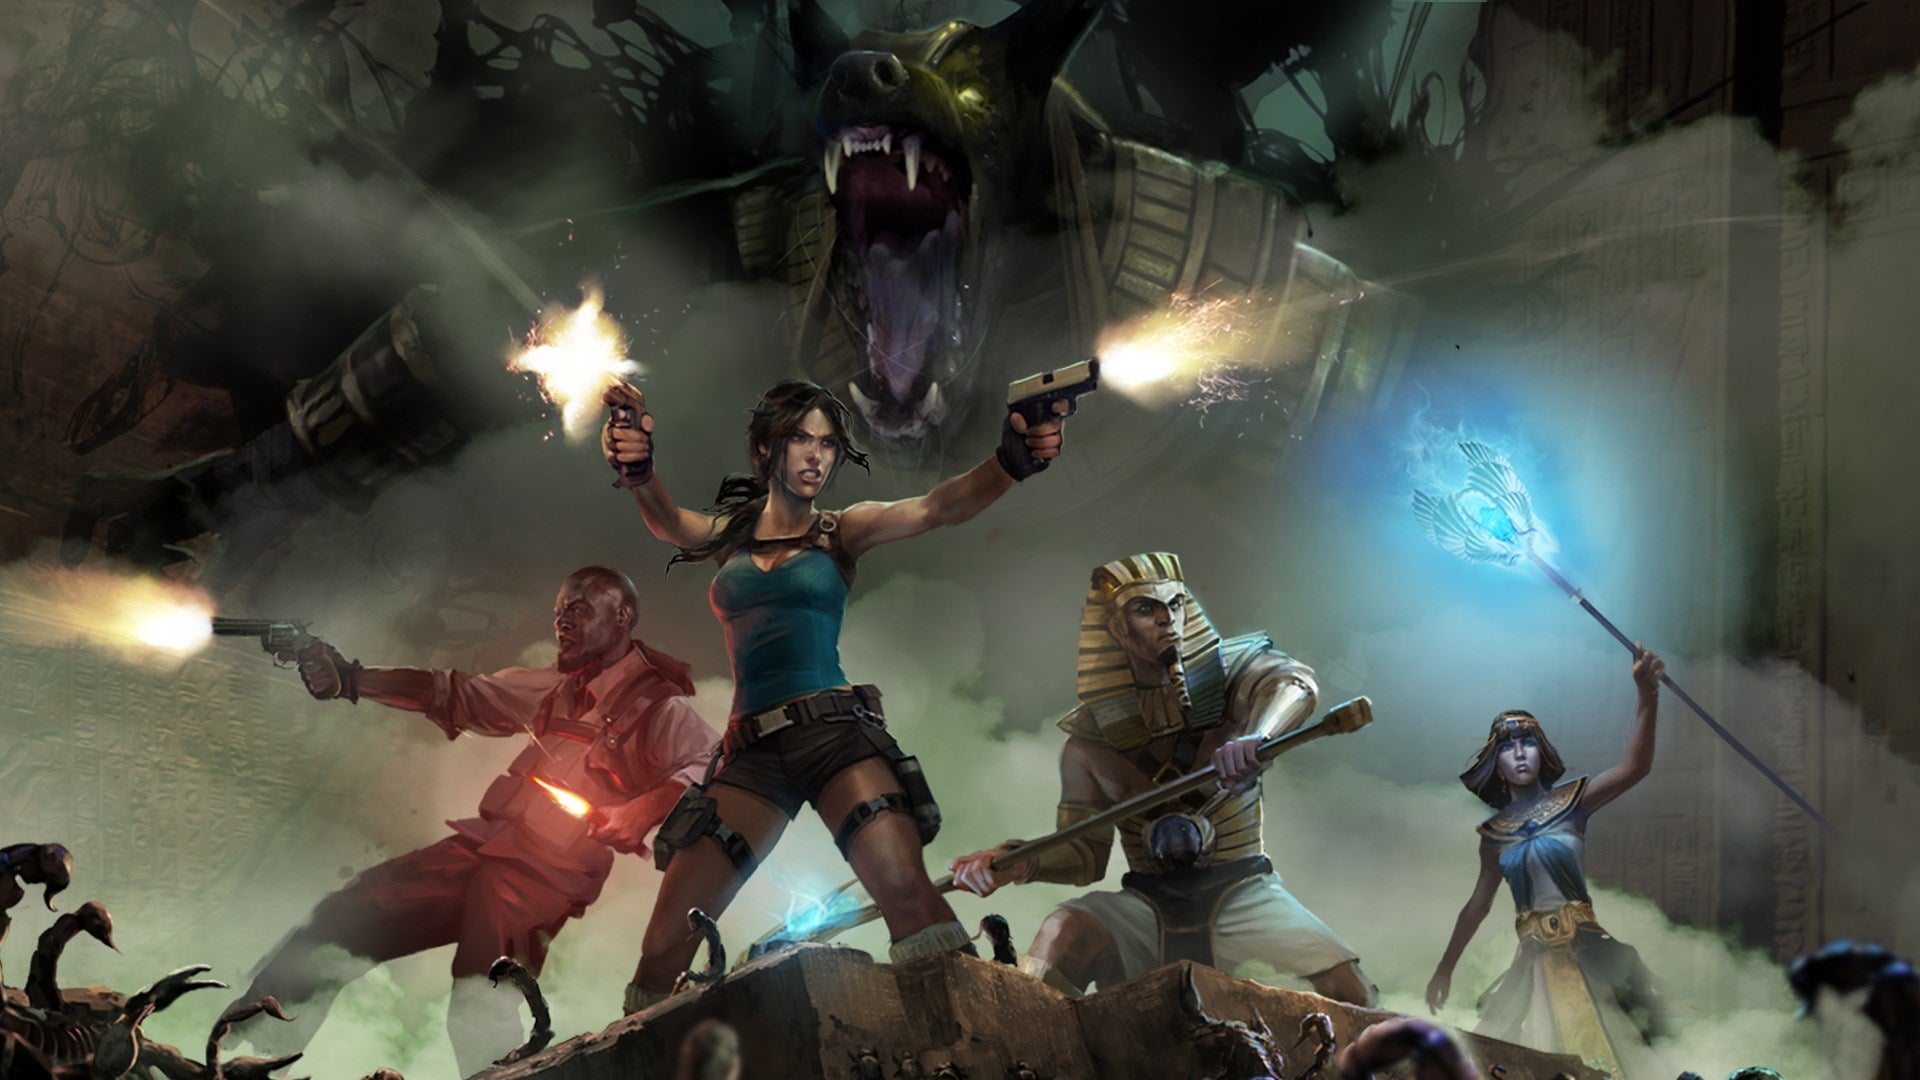 Image for Lara Croft and the Guardian of Light and Temple of Osiris coming to Nintendo Switch